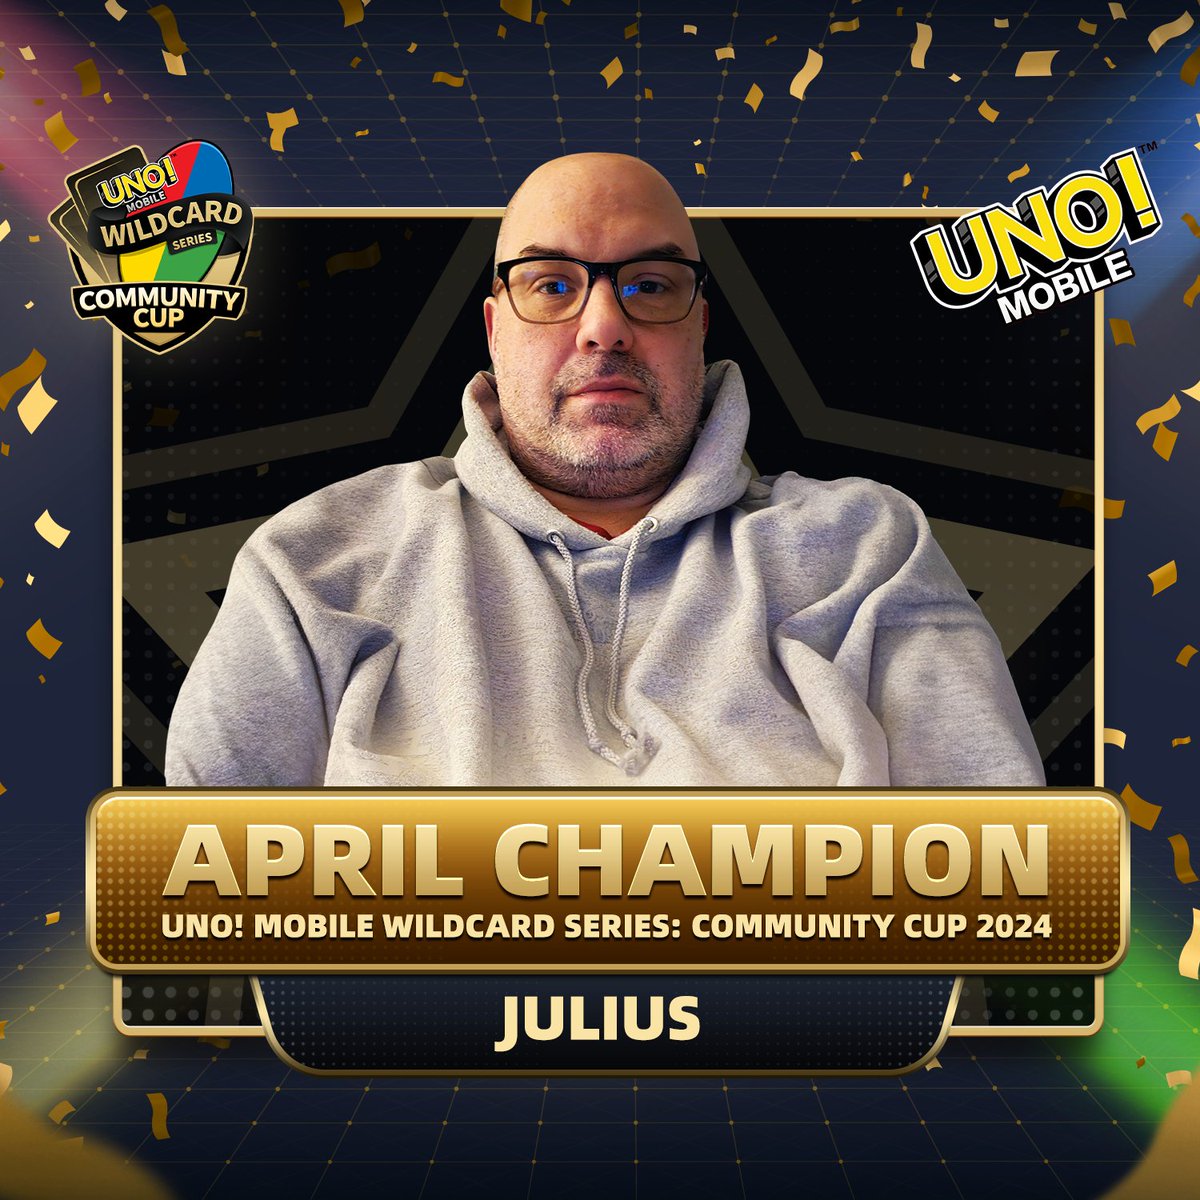 🌟🏆 𝐒𝐩𝐨𝐭𝐥𝐢𝐠𝐡𝐭 𝐨𝐧 𝐭𝐡𝐞 𝐂𝐡𝐚𝐦𝐩𝐢𝐨𝐧! 🌟🏆 🥇 Congratulations to Julius for winning the UNO! Mobile Community Cup 2024 April tournament! 👉 𝐏𝐥𝐚𝐲 𝐍𝐨𝐰: bit.ly/UNOMobileCommu…